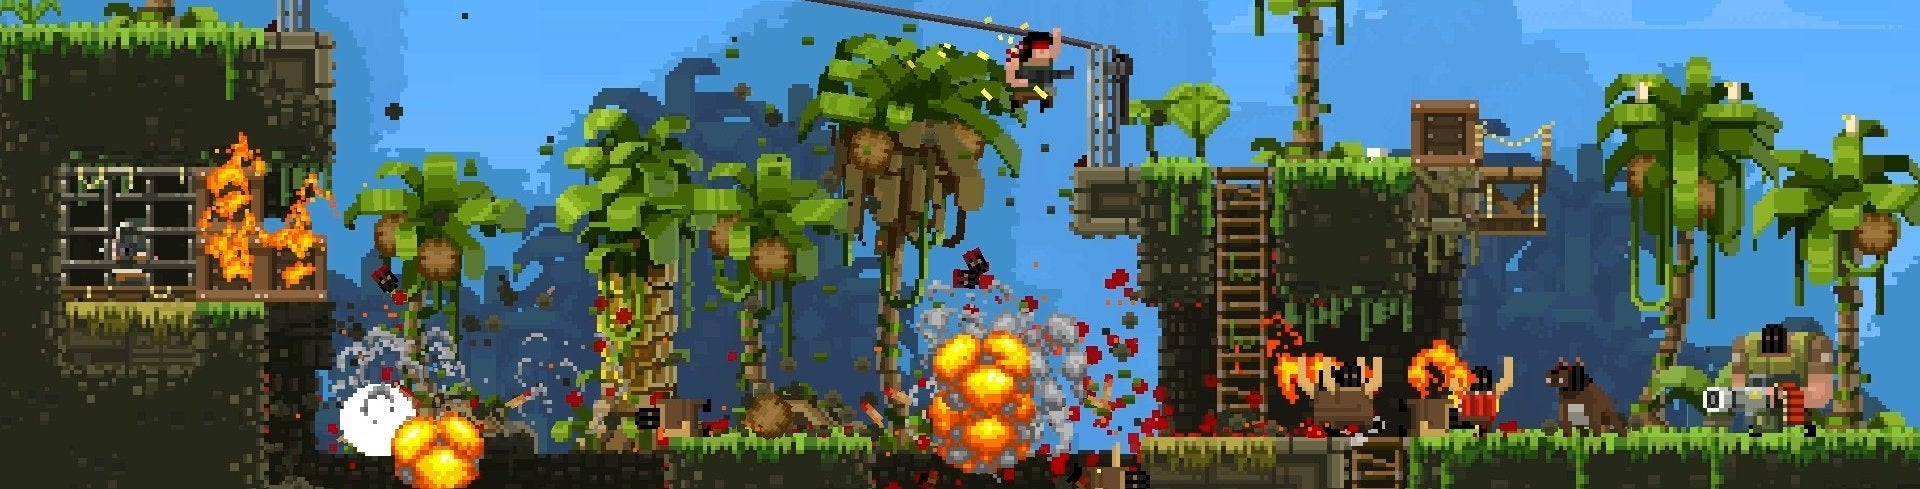 Image for Broforce has performance issues on PS4